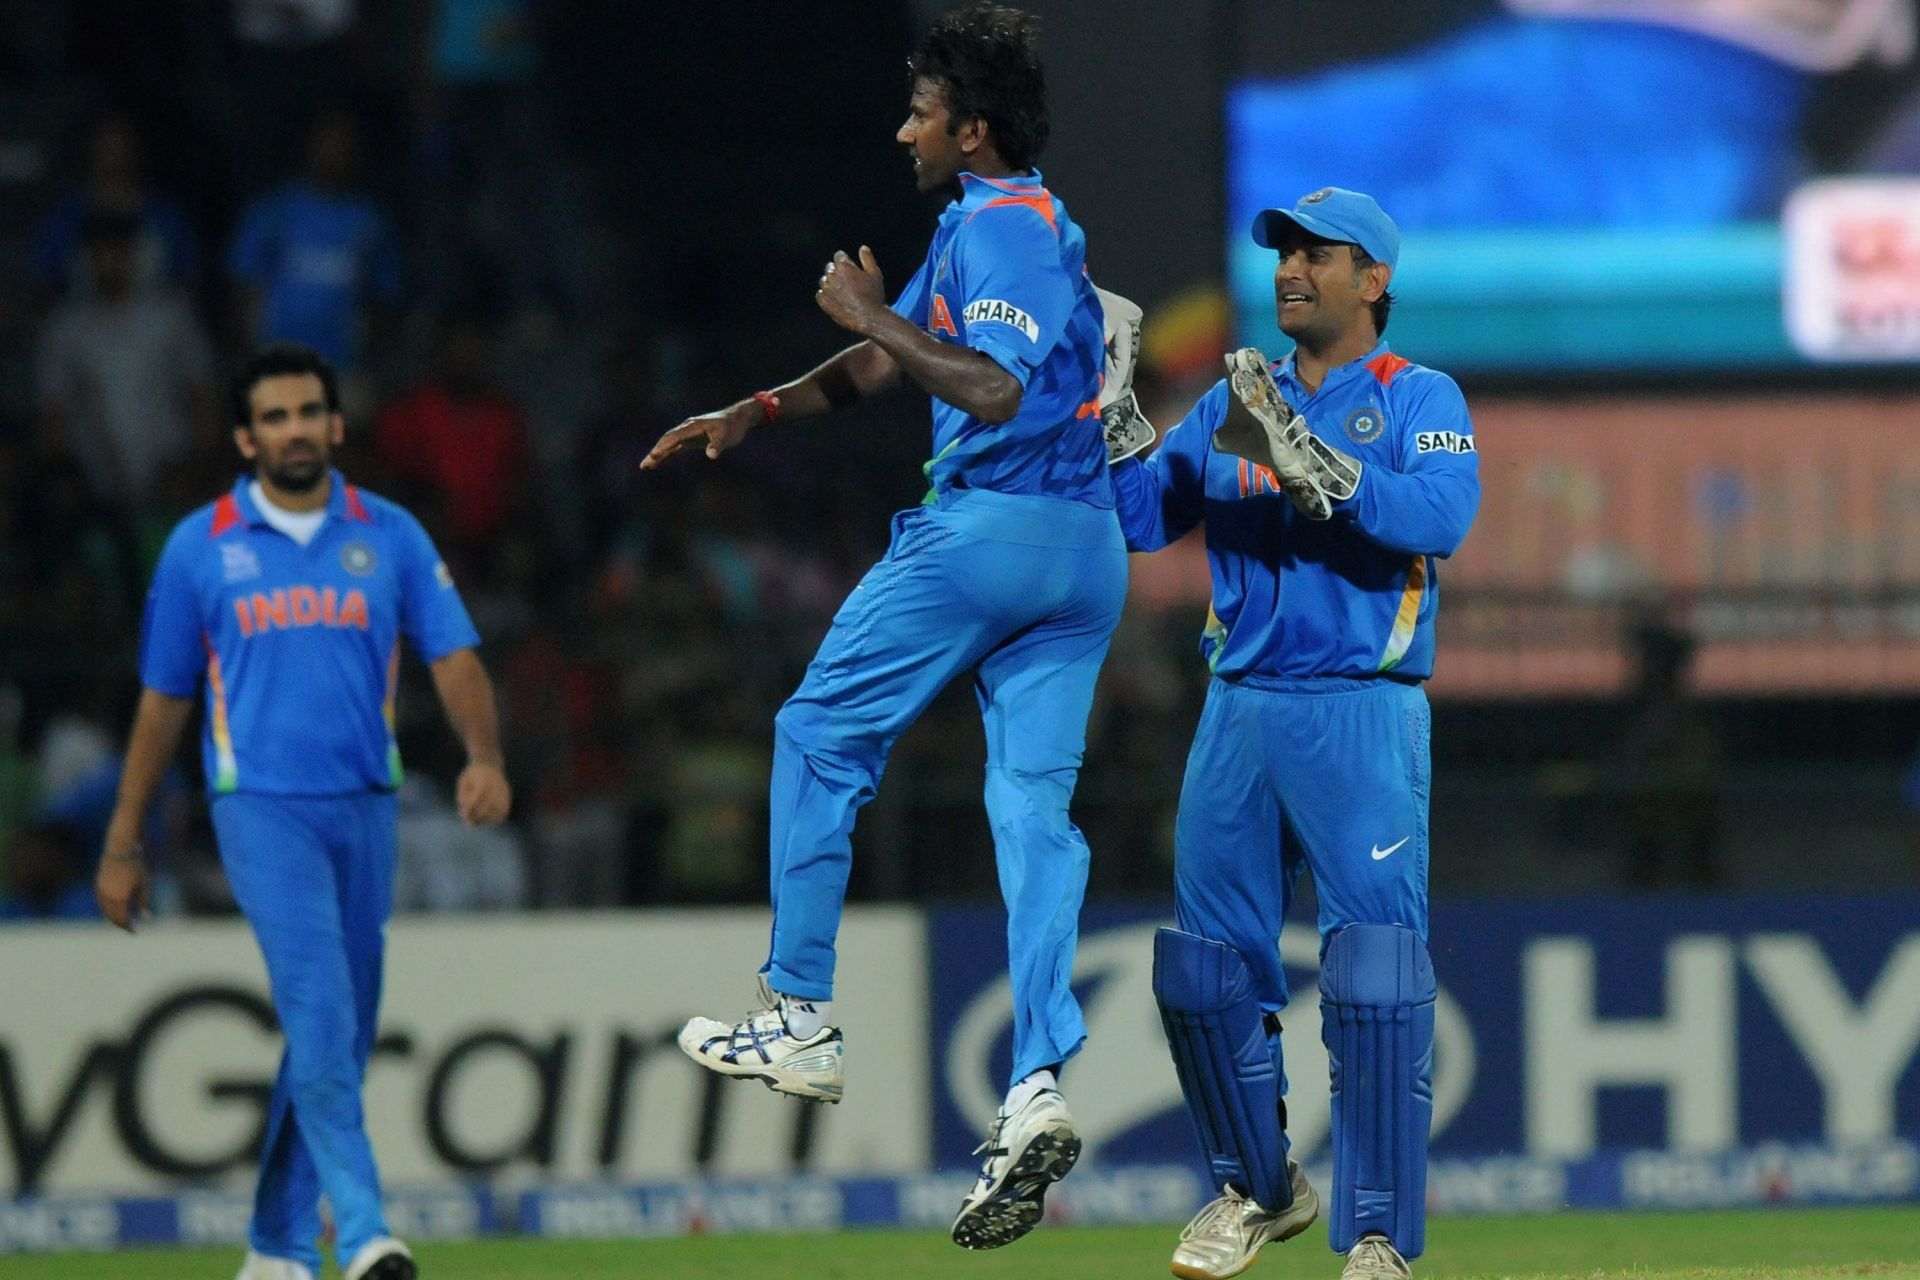 Lakshmipathy Balaji played for India along with Rohit Sharma in the T20 World Cup 2012 (Image: Getty)